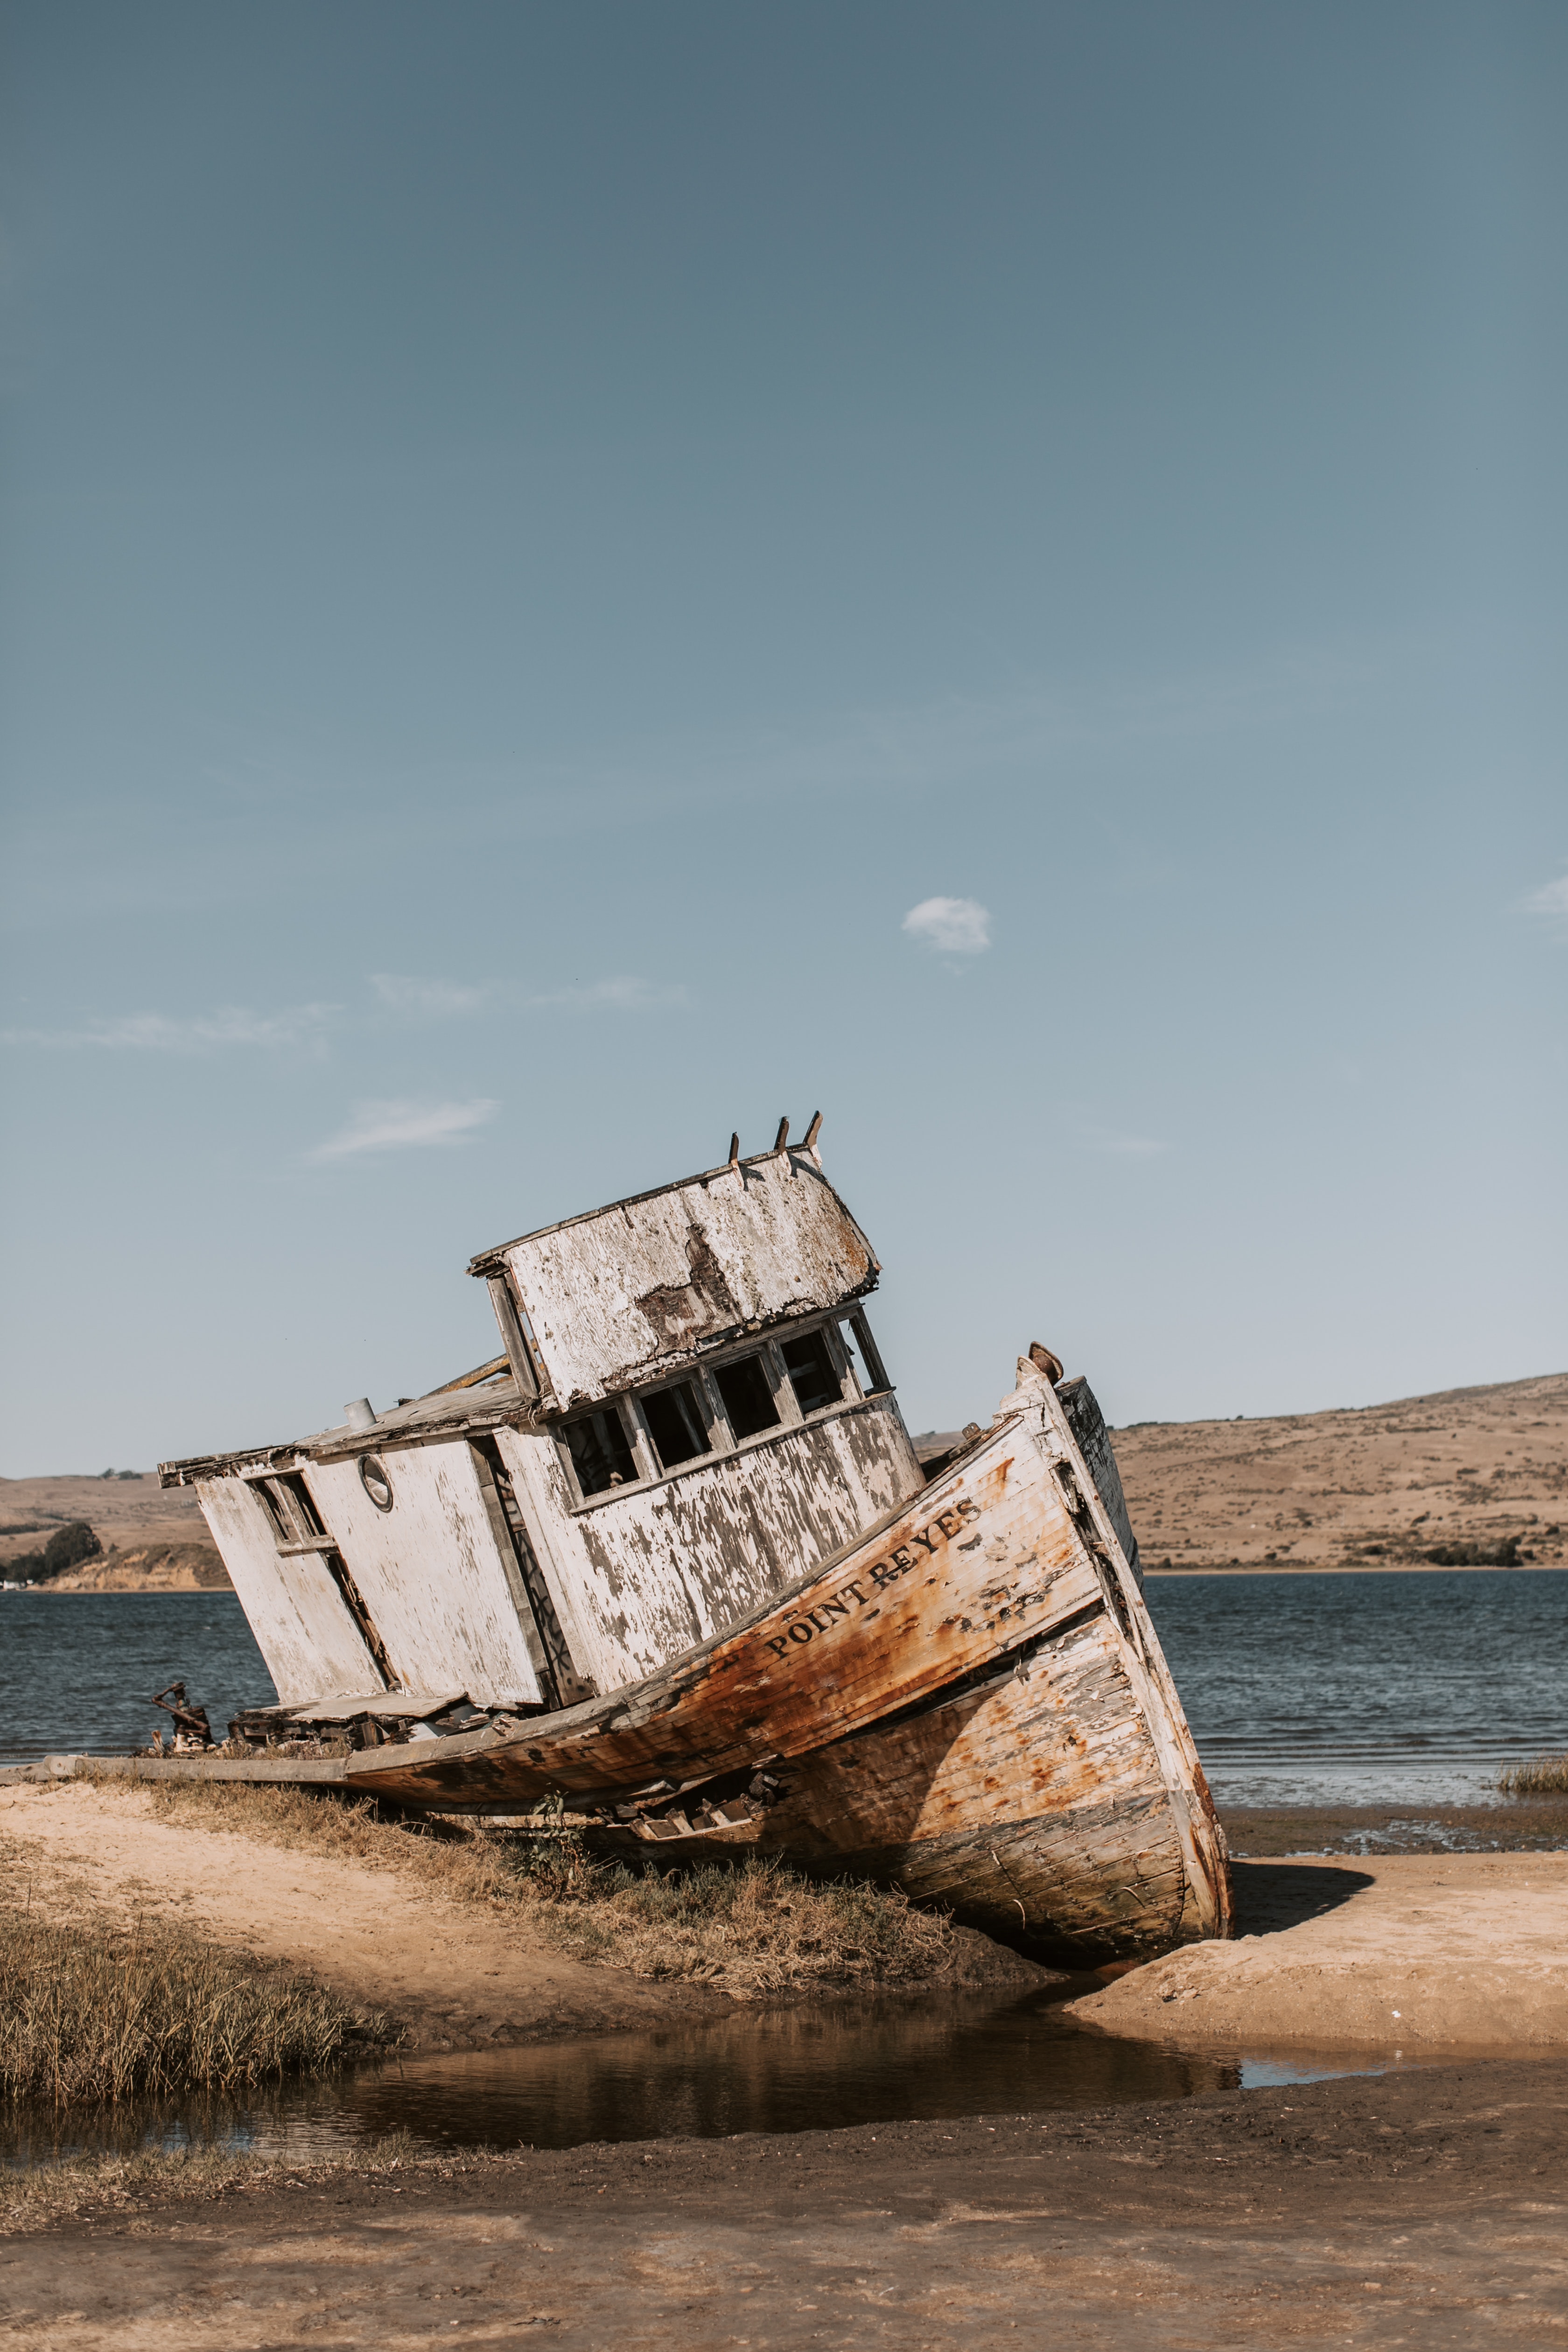 Best Free Abandoned Ship & Image · 100% Royalty Free HD Downloads